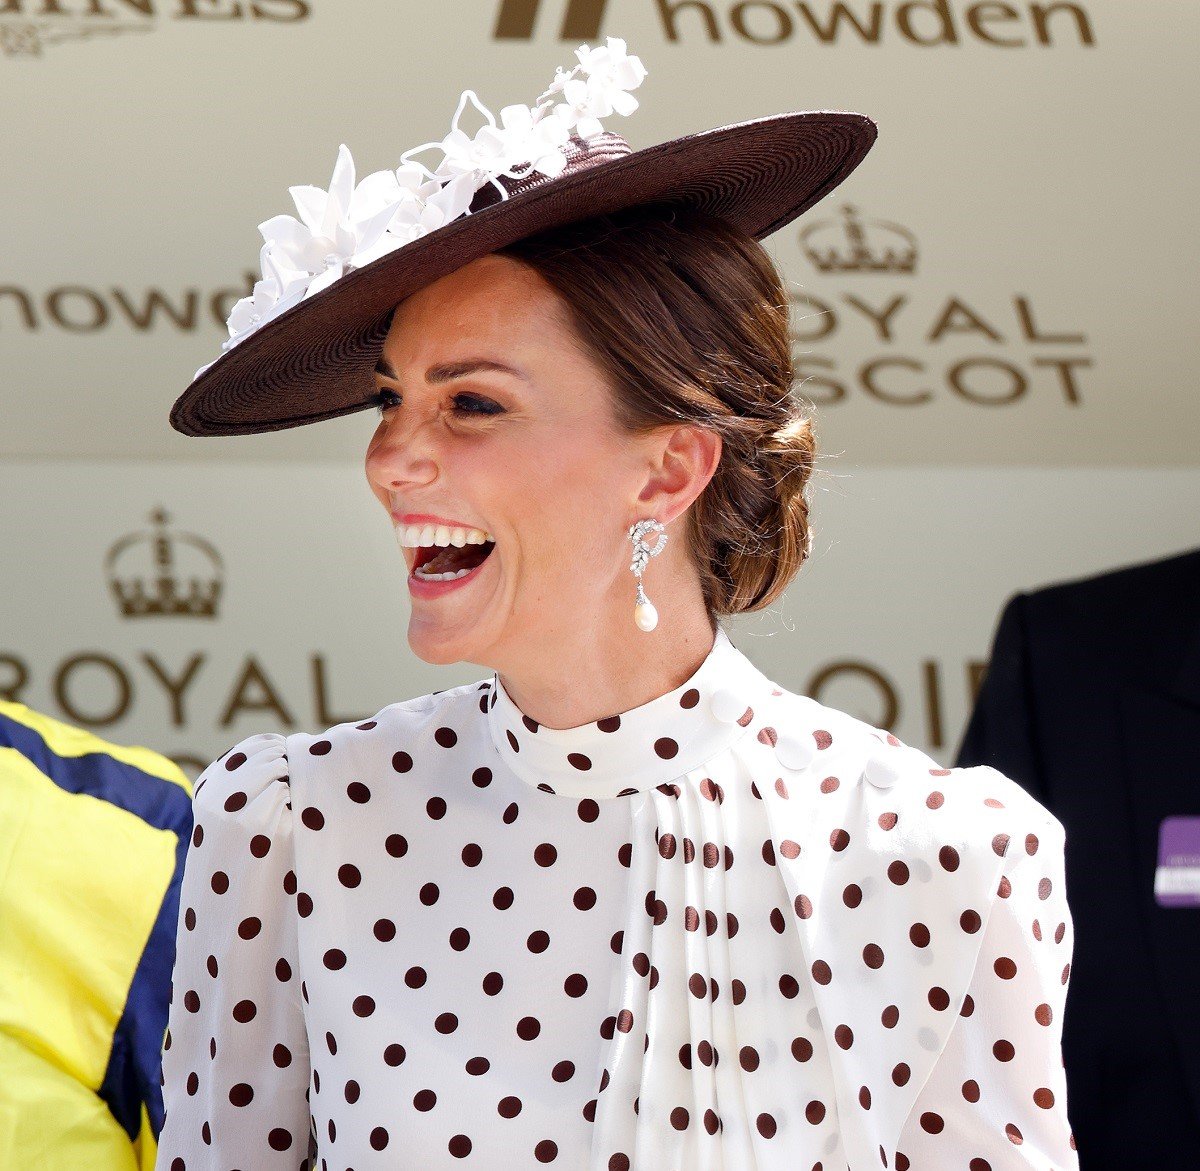 Kate Middleton Can’t Stop Wearing These Dresses That the Designer Says Include a ‘Naughty’ Detail